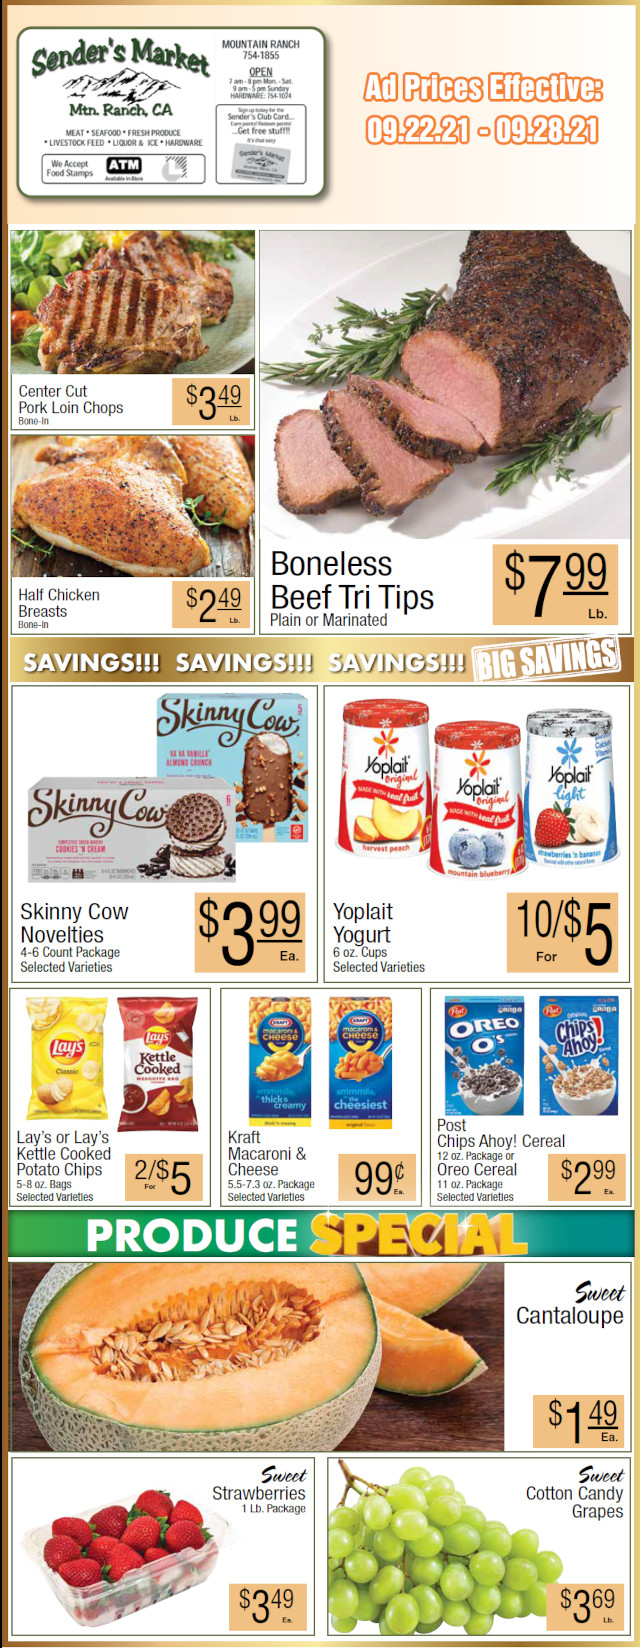 Sender’s Market’s Weekly Ad & Grocery Specials Through September 28th! Shop Local & Save!